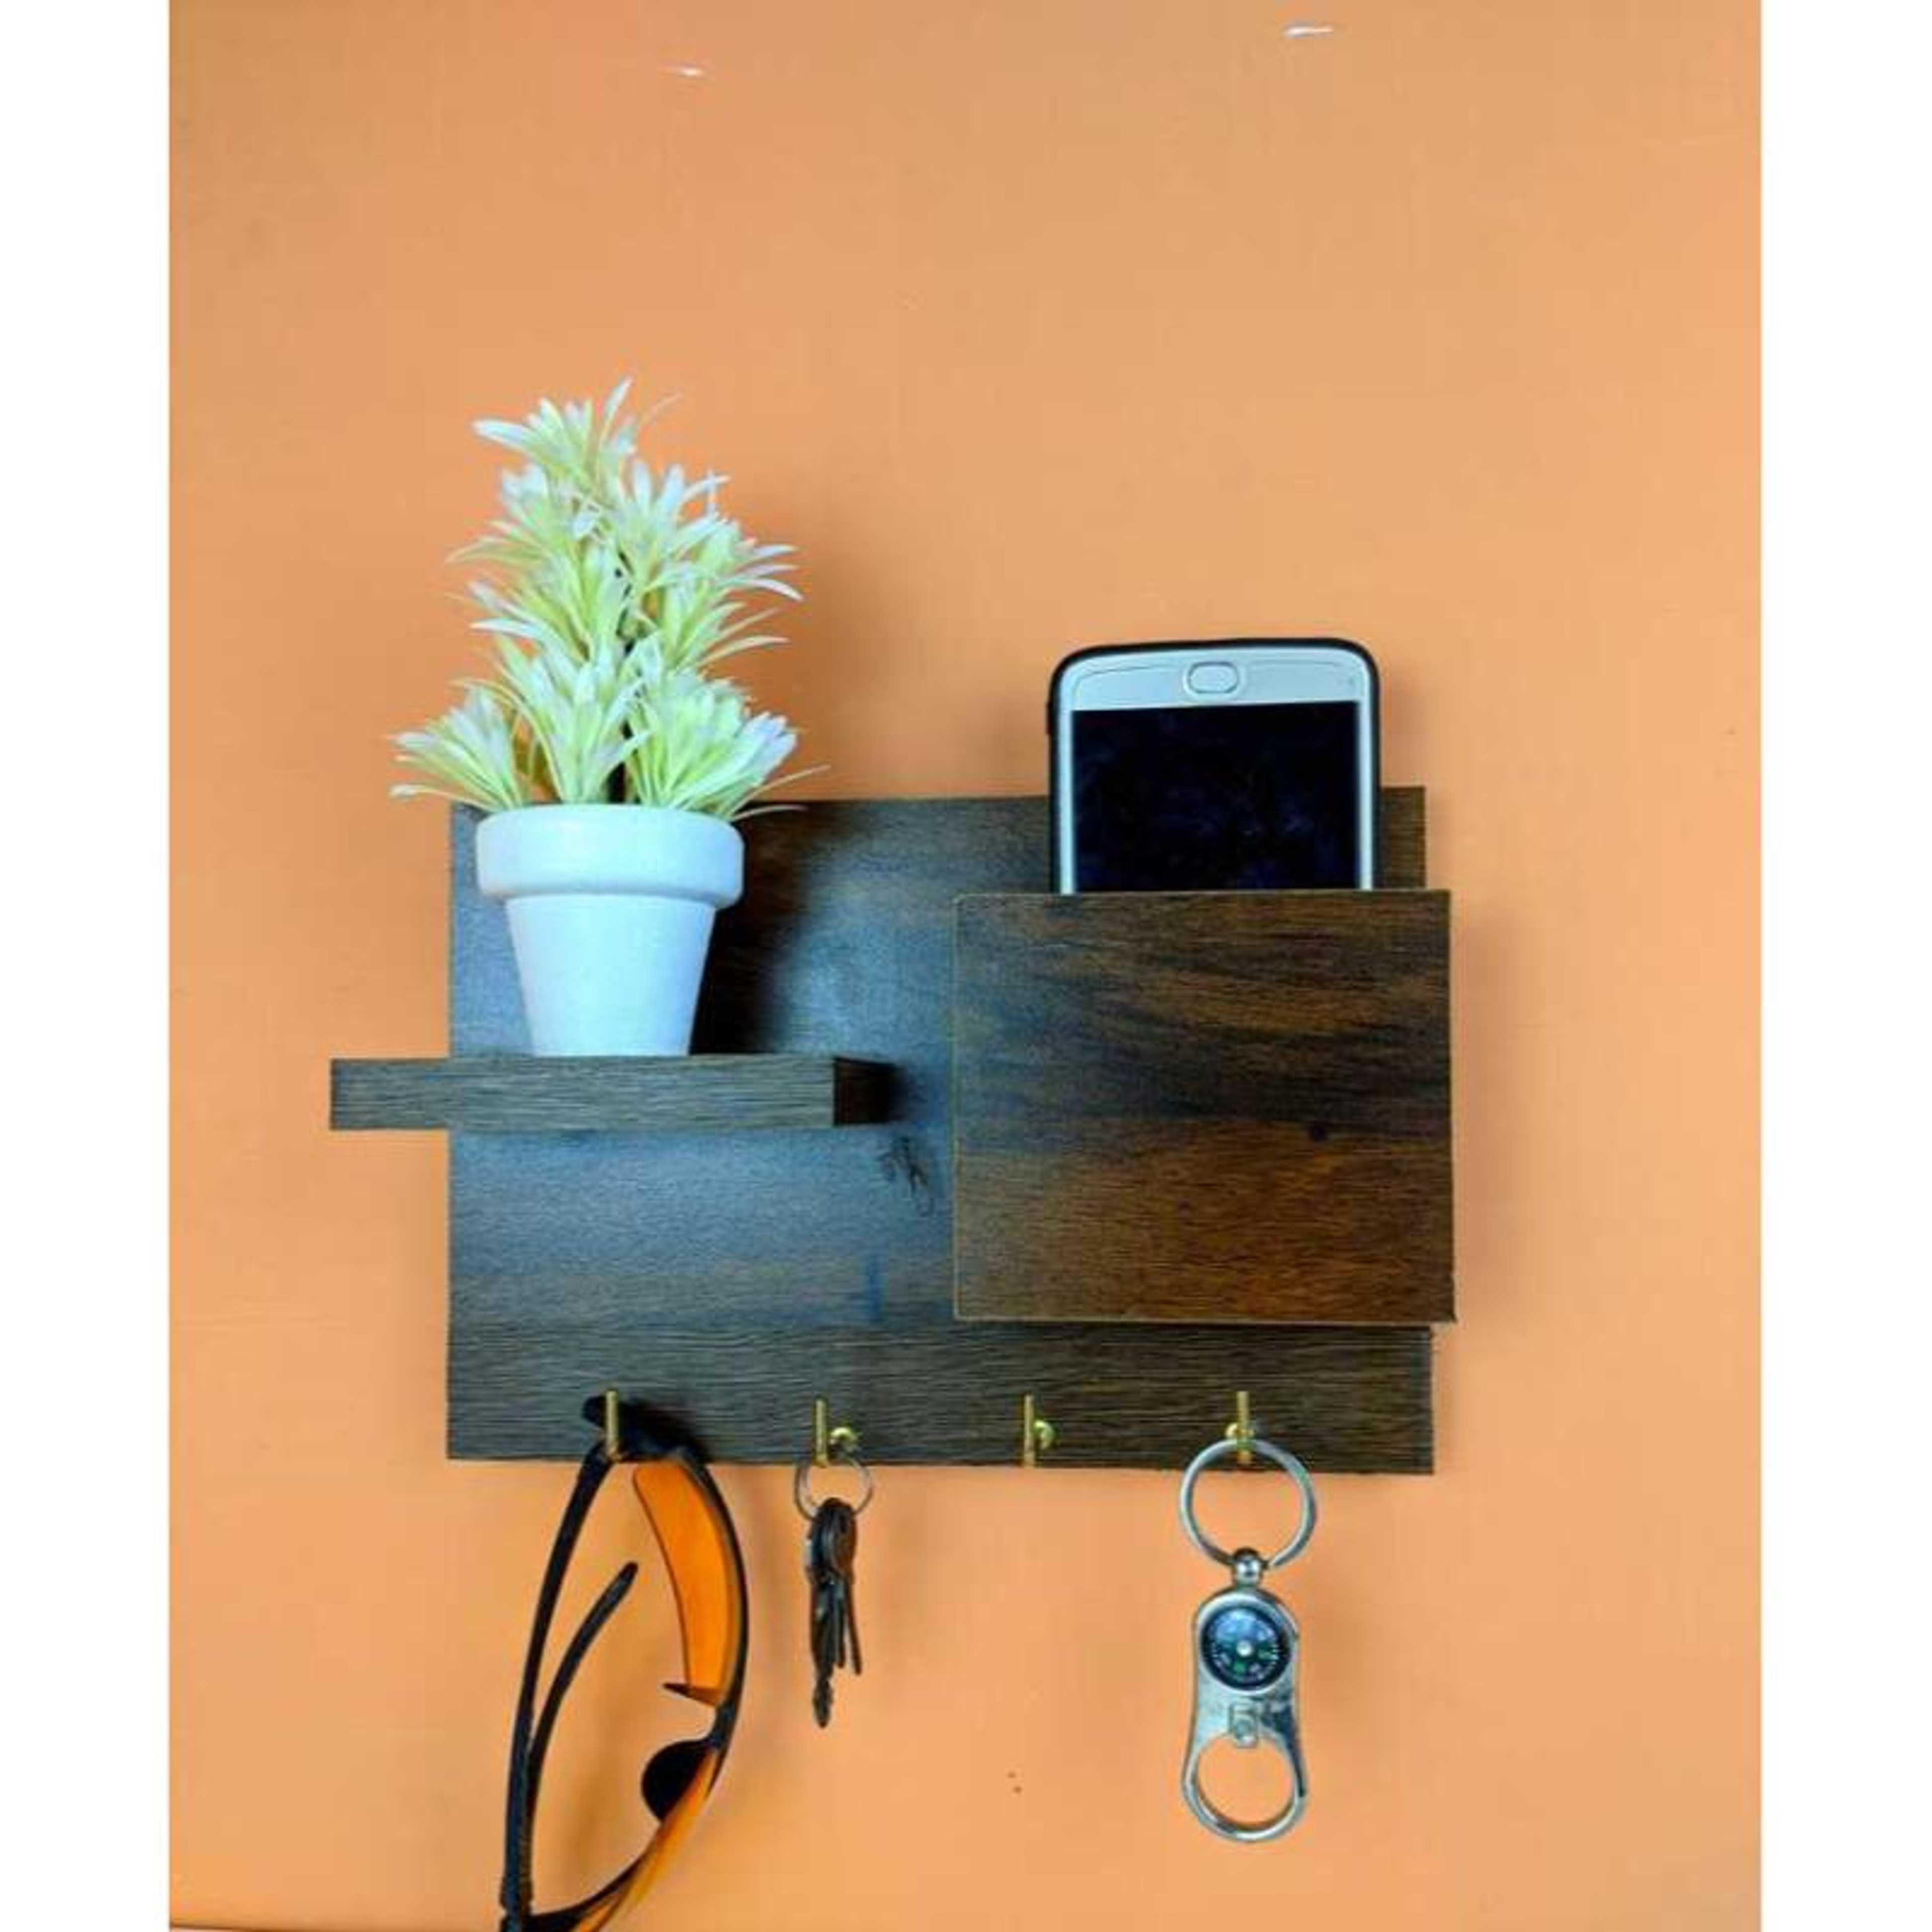 Key Holder Key rack Stand for Wall Office & Home Decorative Antique Design no 050 Official Mart89 Branded Product